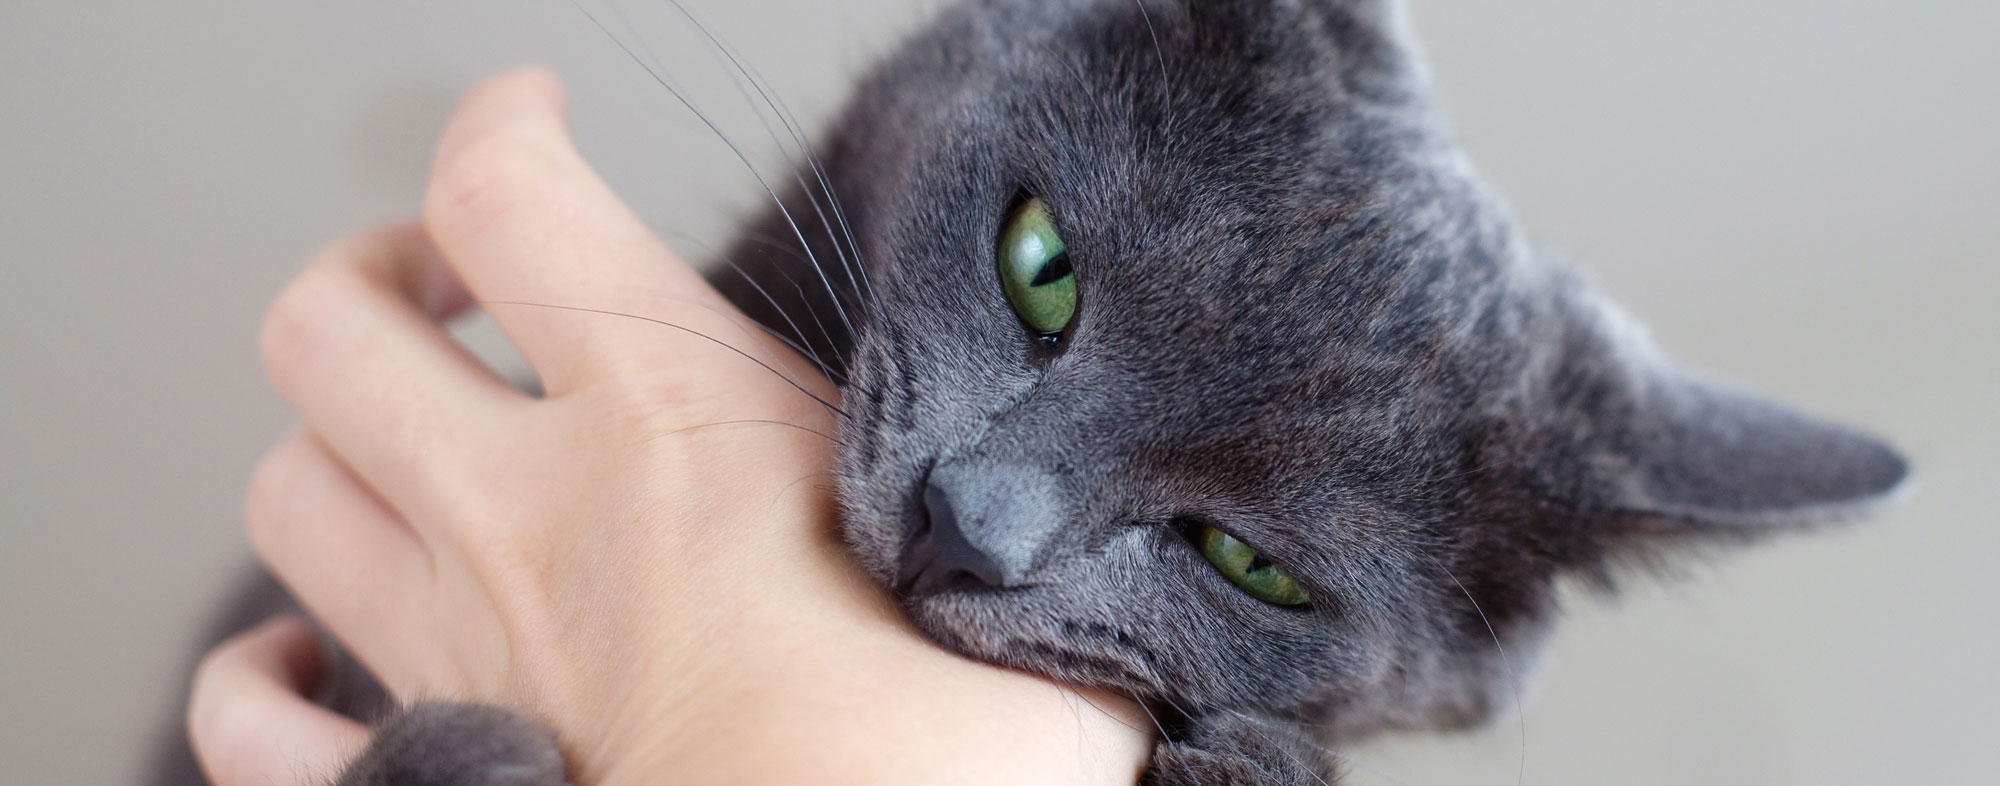 Cat biting hand. Learn about the difference between cat biting and cat play biting.